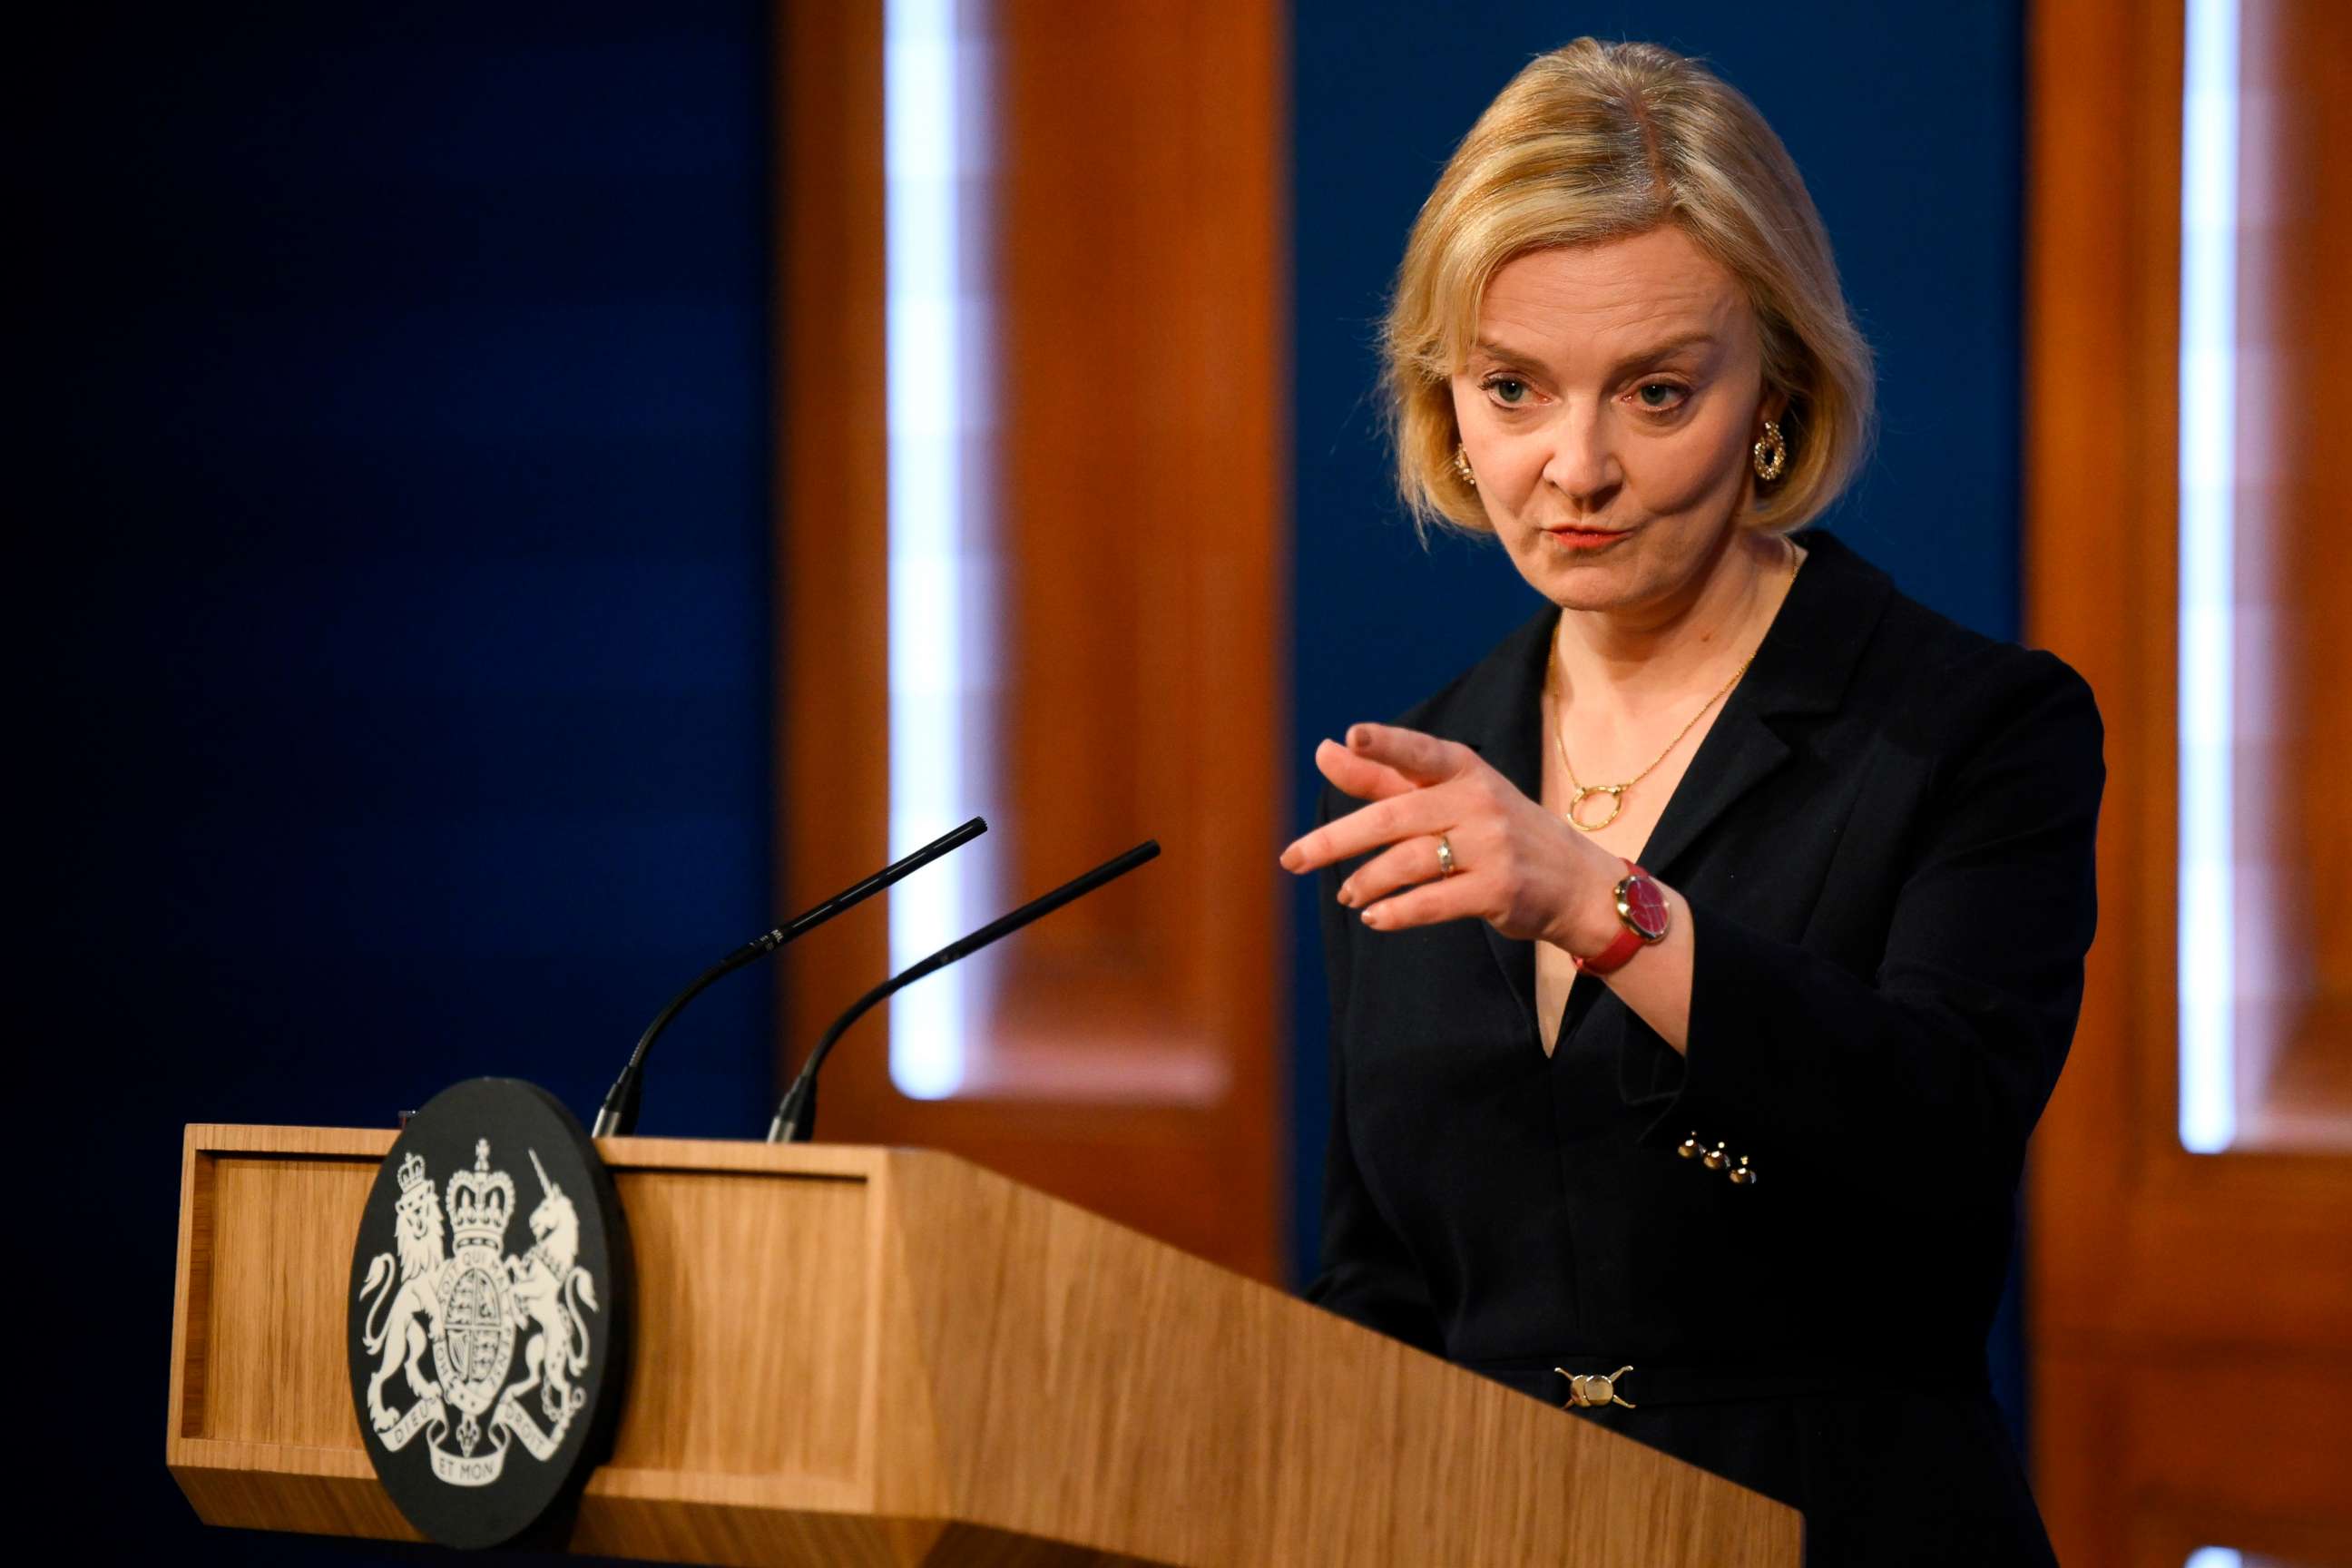 PHOTO: Britain's Prime Minister Liz Truss attends a press conference in the Downing Street Briefing Room in central London, on Oct. 14, 2022.